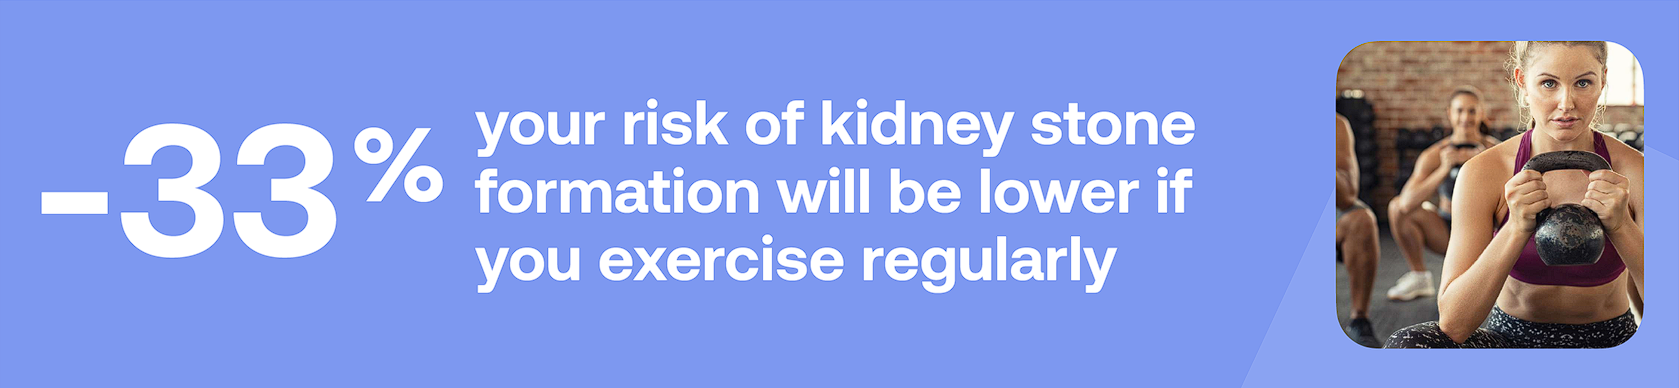 -33% your risk of kidney stone formation will be lower if you exercise regularly